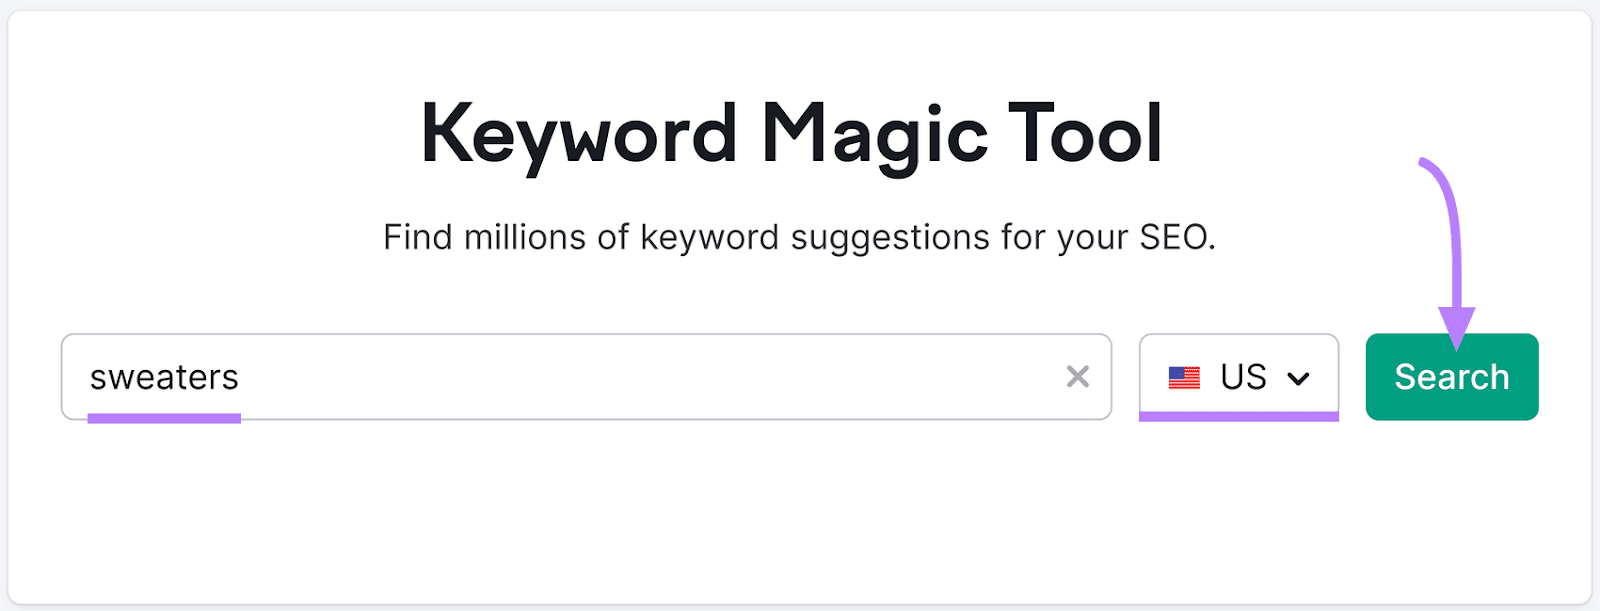 "sweaters" entered into the Keyword Magic Tool hunt  bar